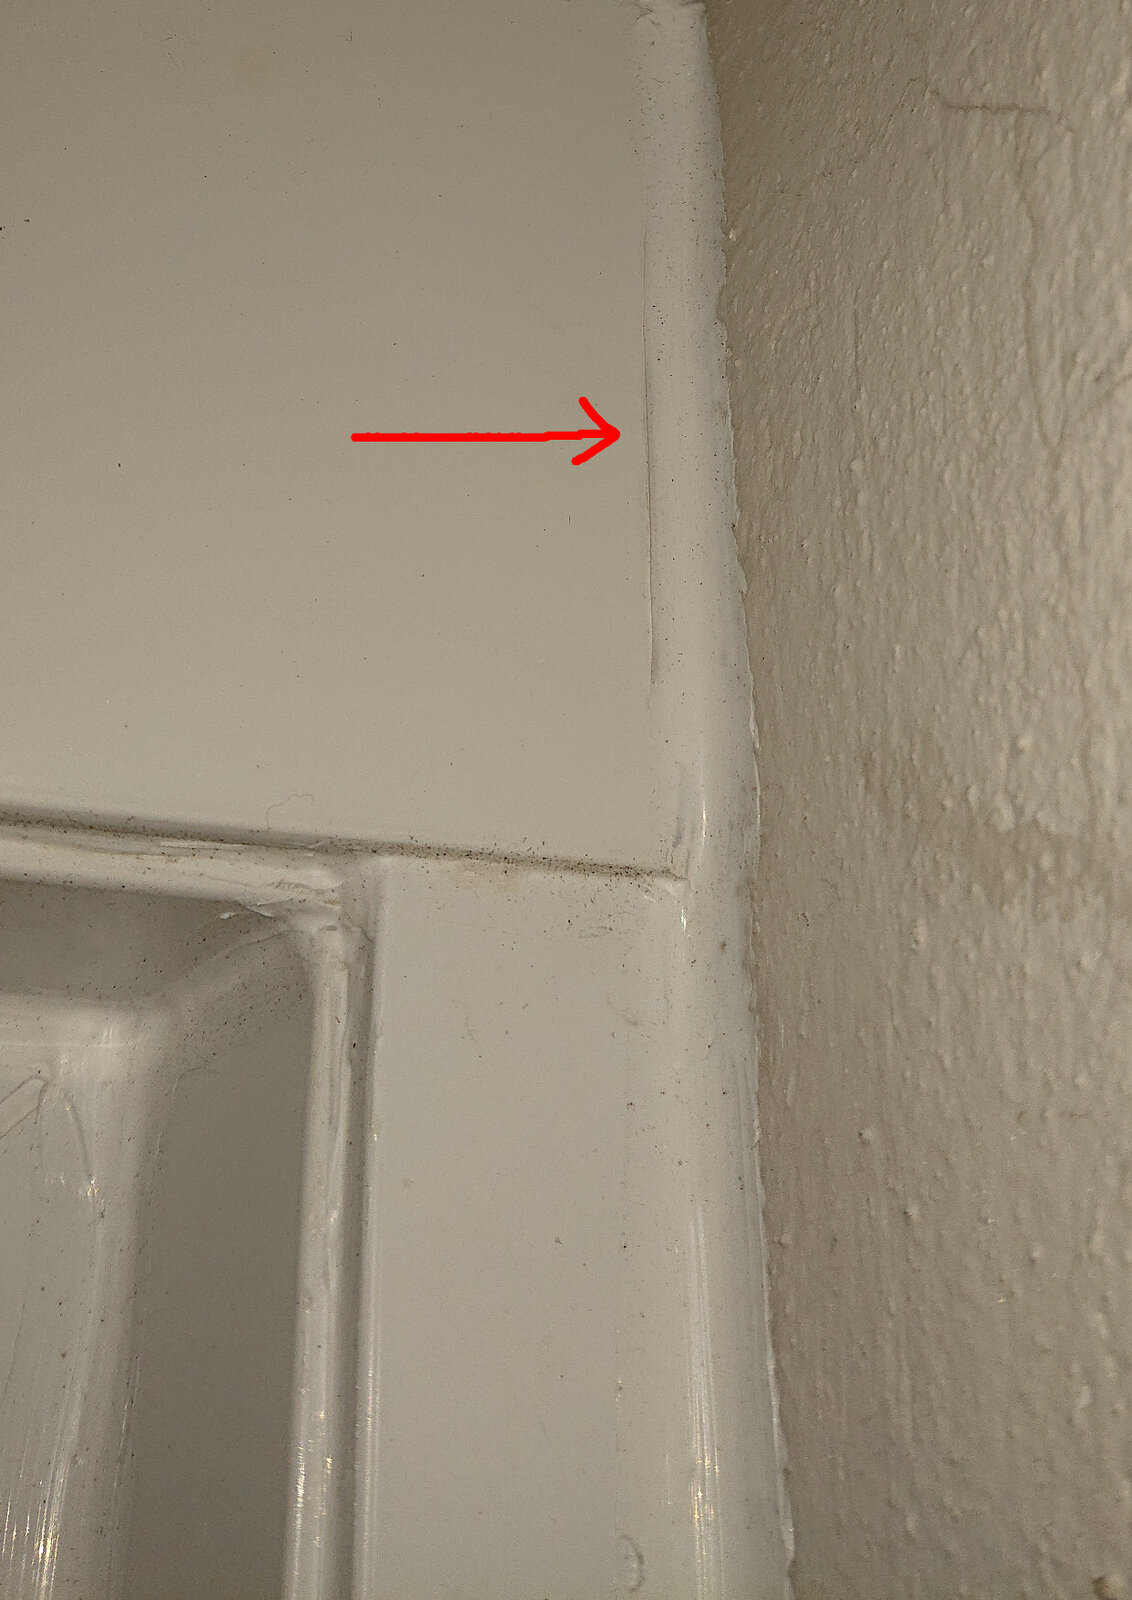 Wet/damp patches at side of patio doorframe | DIYnot Forums